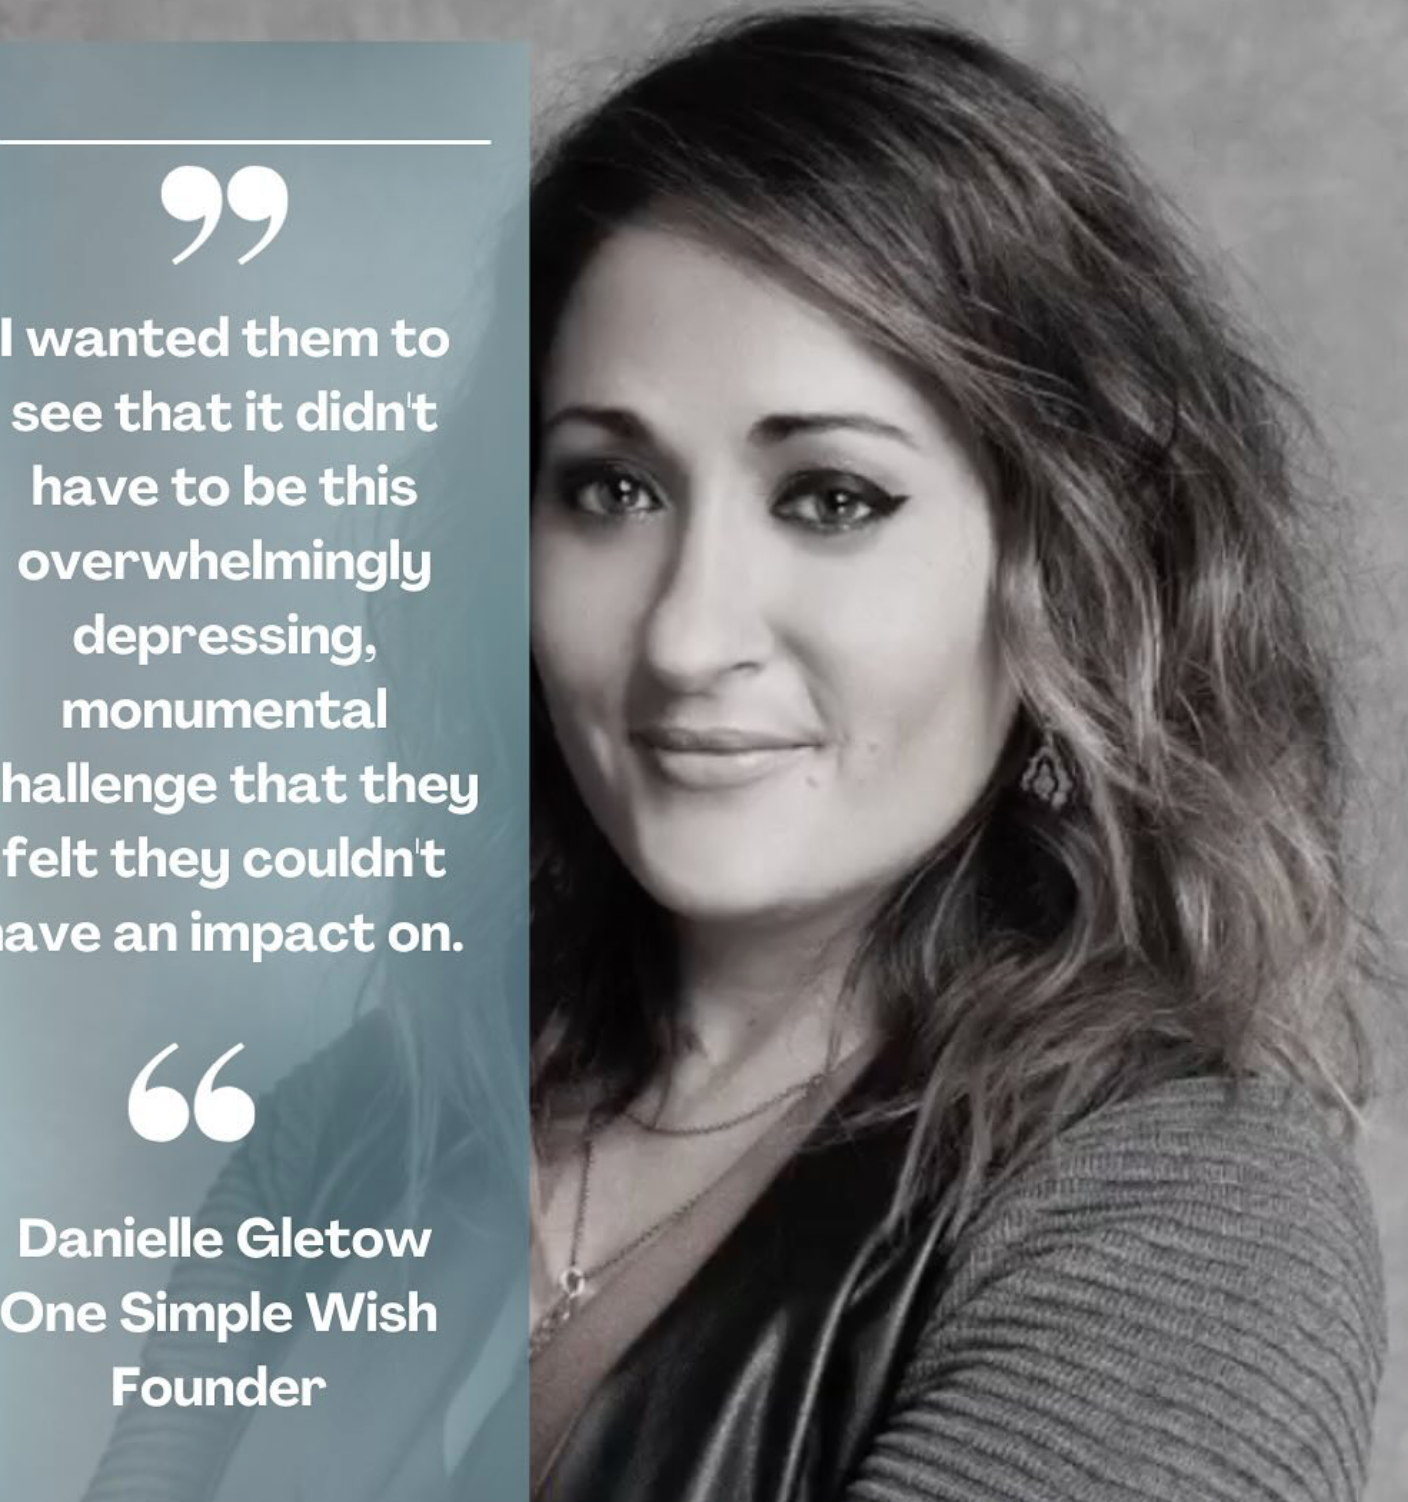 Repost With CNN Hero One Simple Wish Founder Danielle Gletow